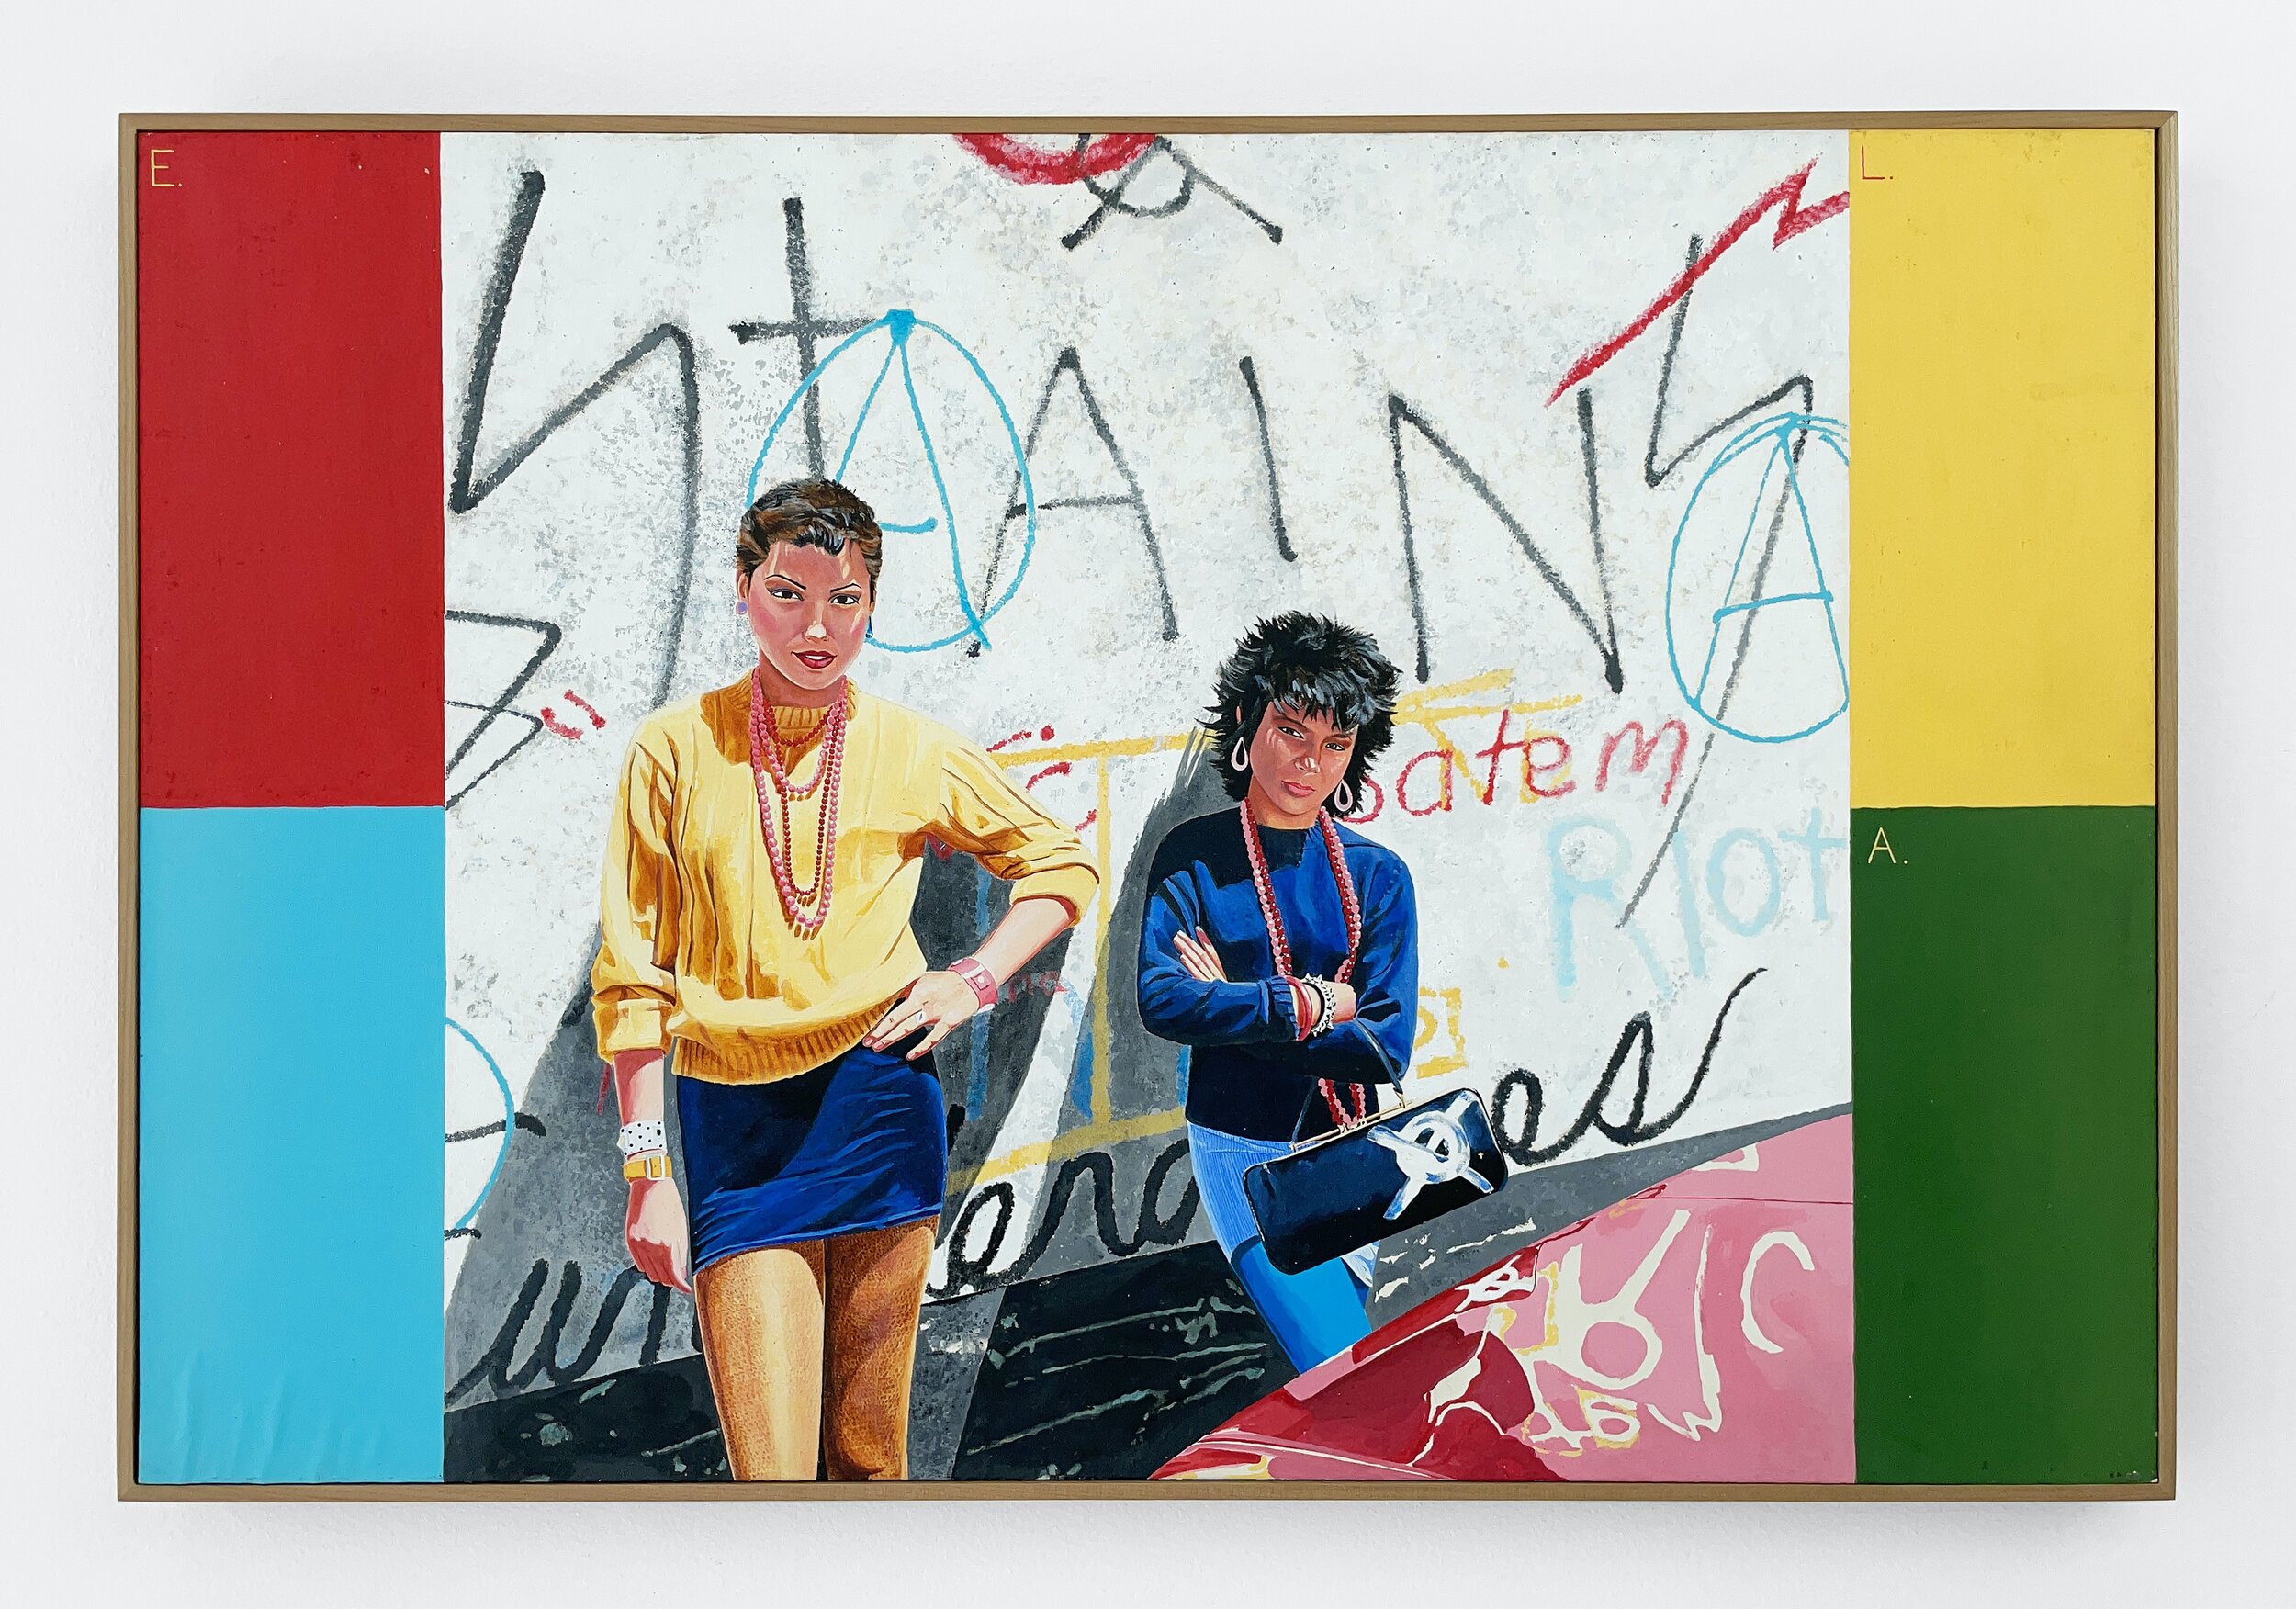  “Rochelle and Sandy”, 1980, acrylic on board, mounted on panel, 20.75 x 30.5 inches 